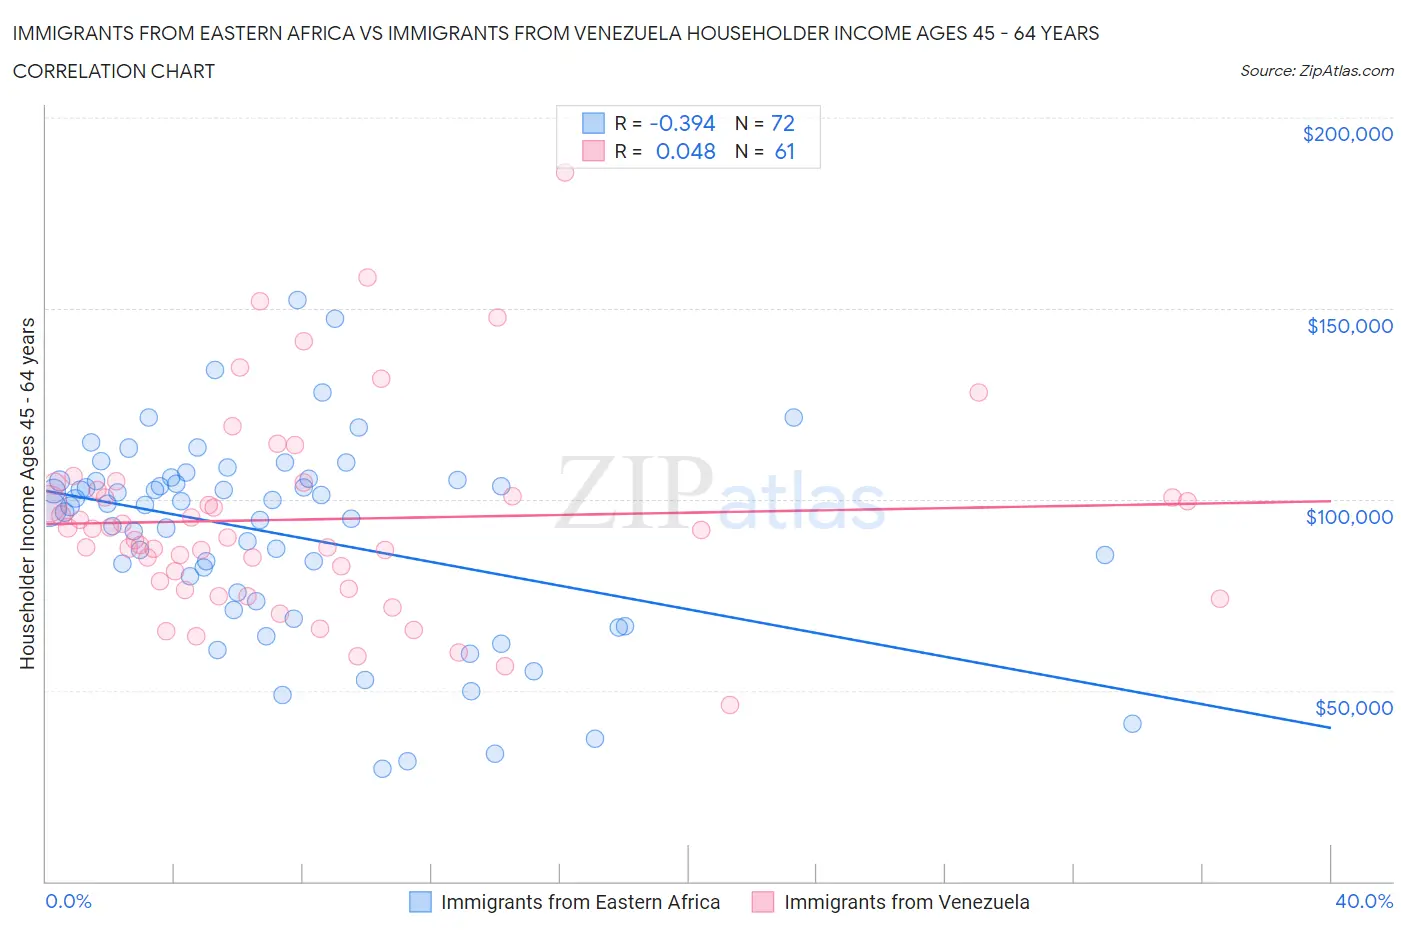 Immigrants from Eastern Africa vs Immigrants from Venezuela Householder Income Ages 45 - 64 years